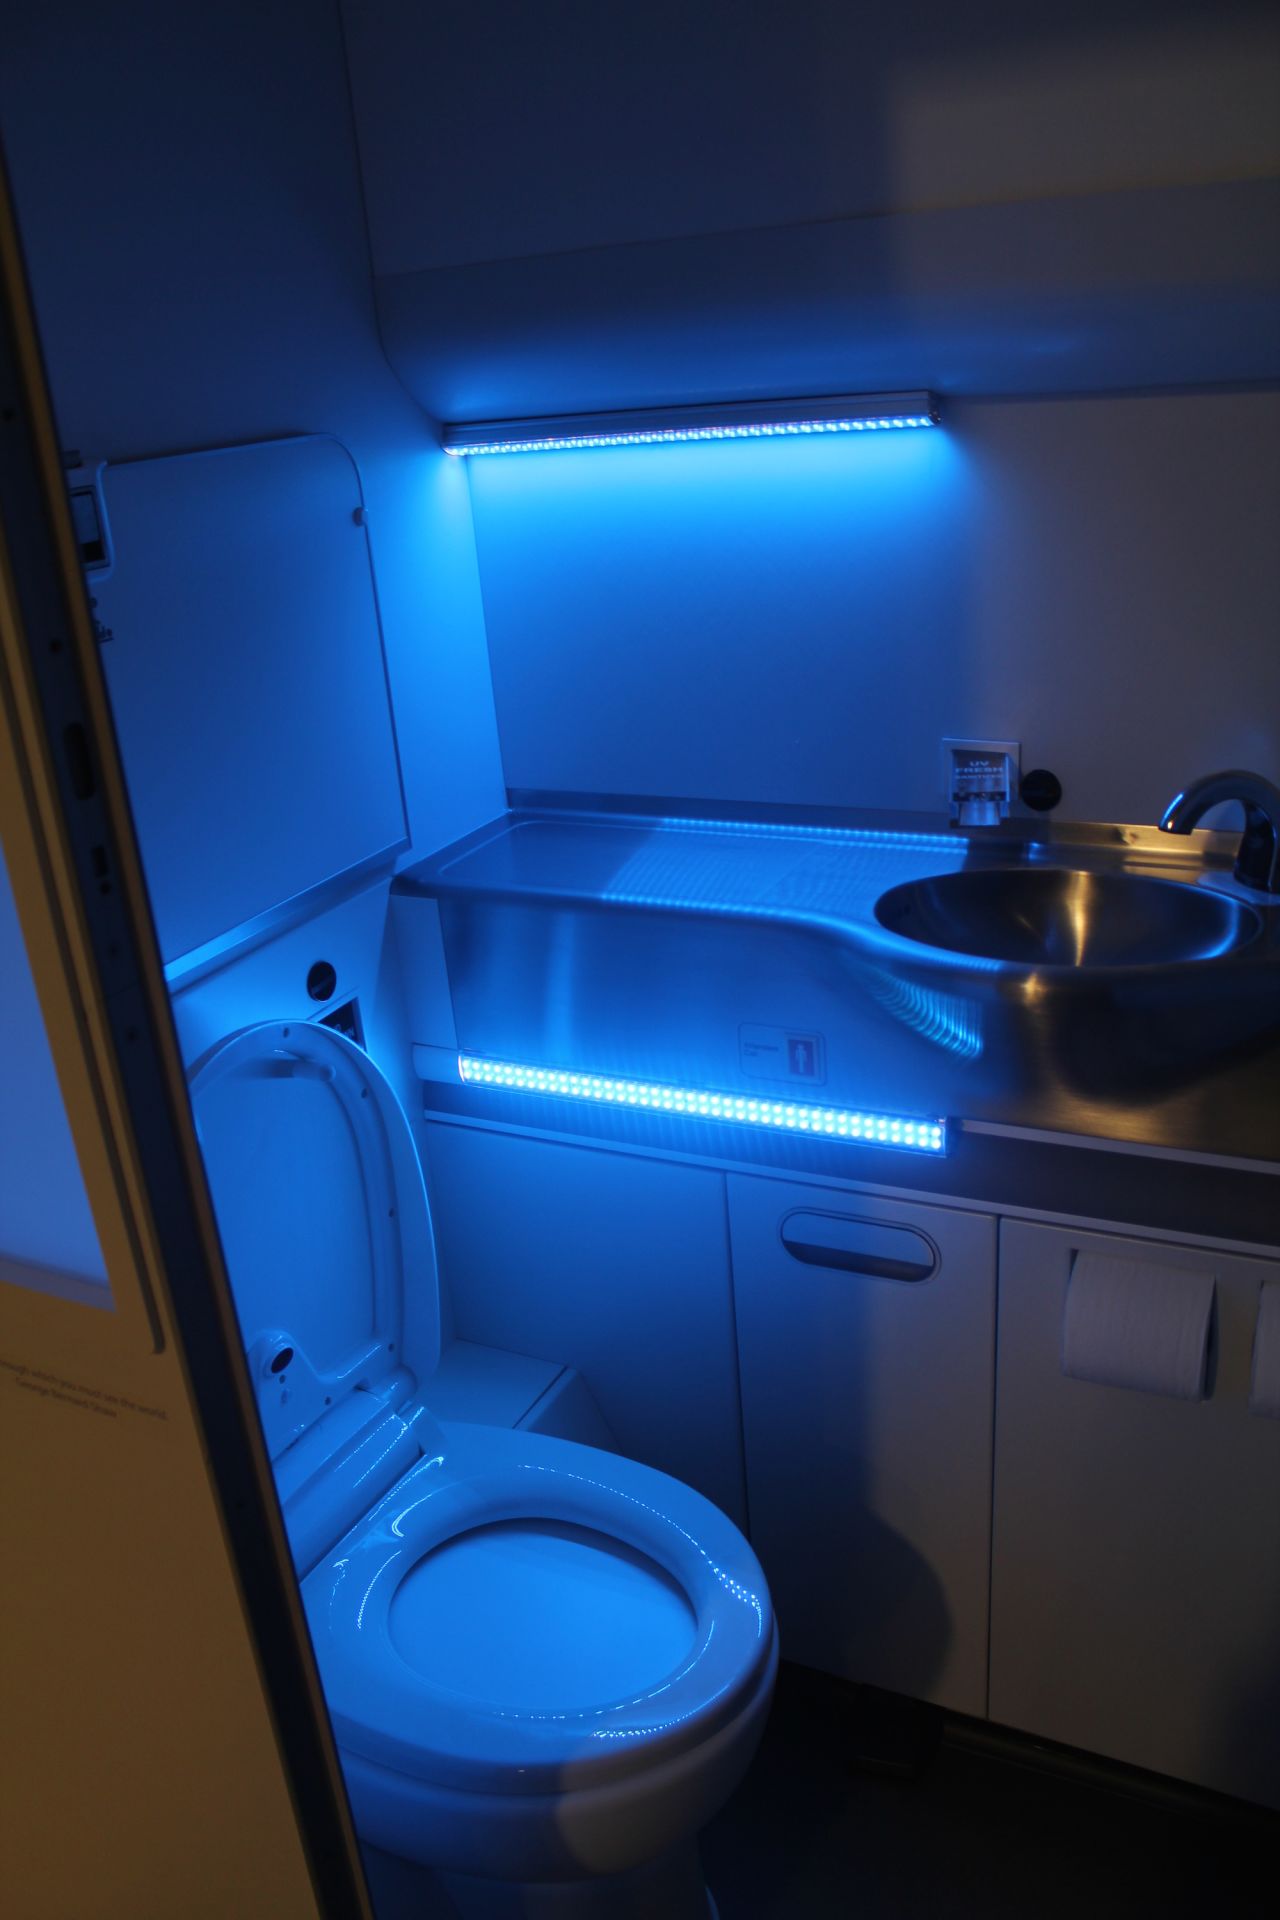 Boeing took home an award for its <a href="http://edition.cnn.com/2016/03/06/aviation/self-cleaning-plane-toilets/">Fresh Lavatory</a> concept. The prototype uses ultraviolet (UV) light to kill 99.99% of all lavatory germs, in three seconds, after every use.